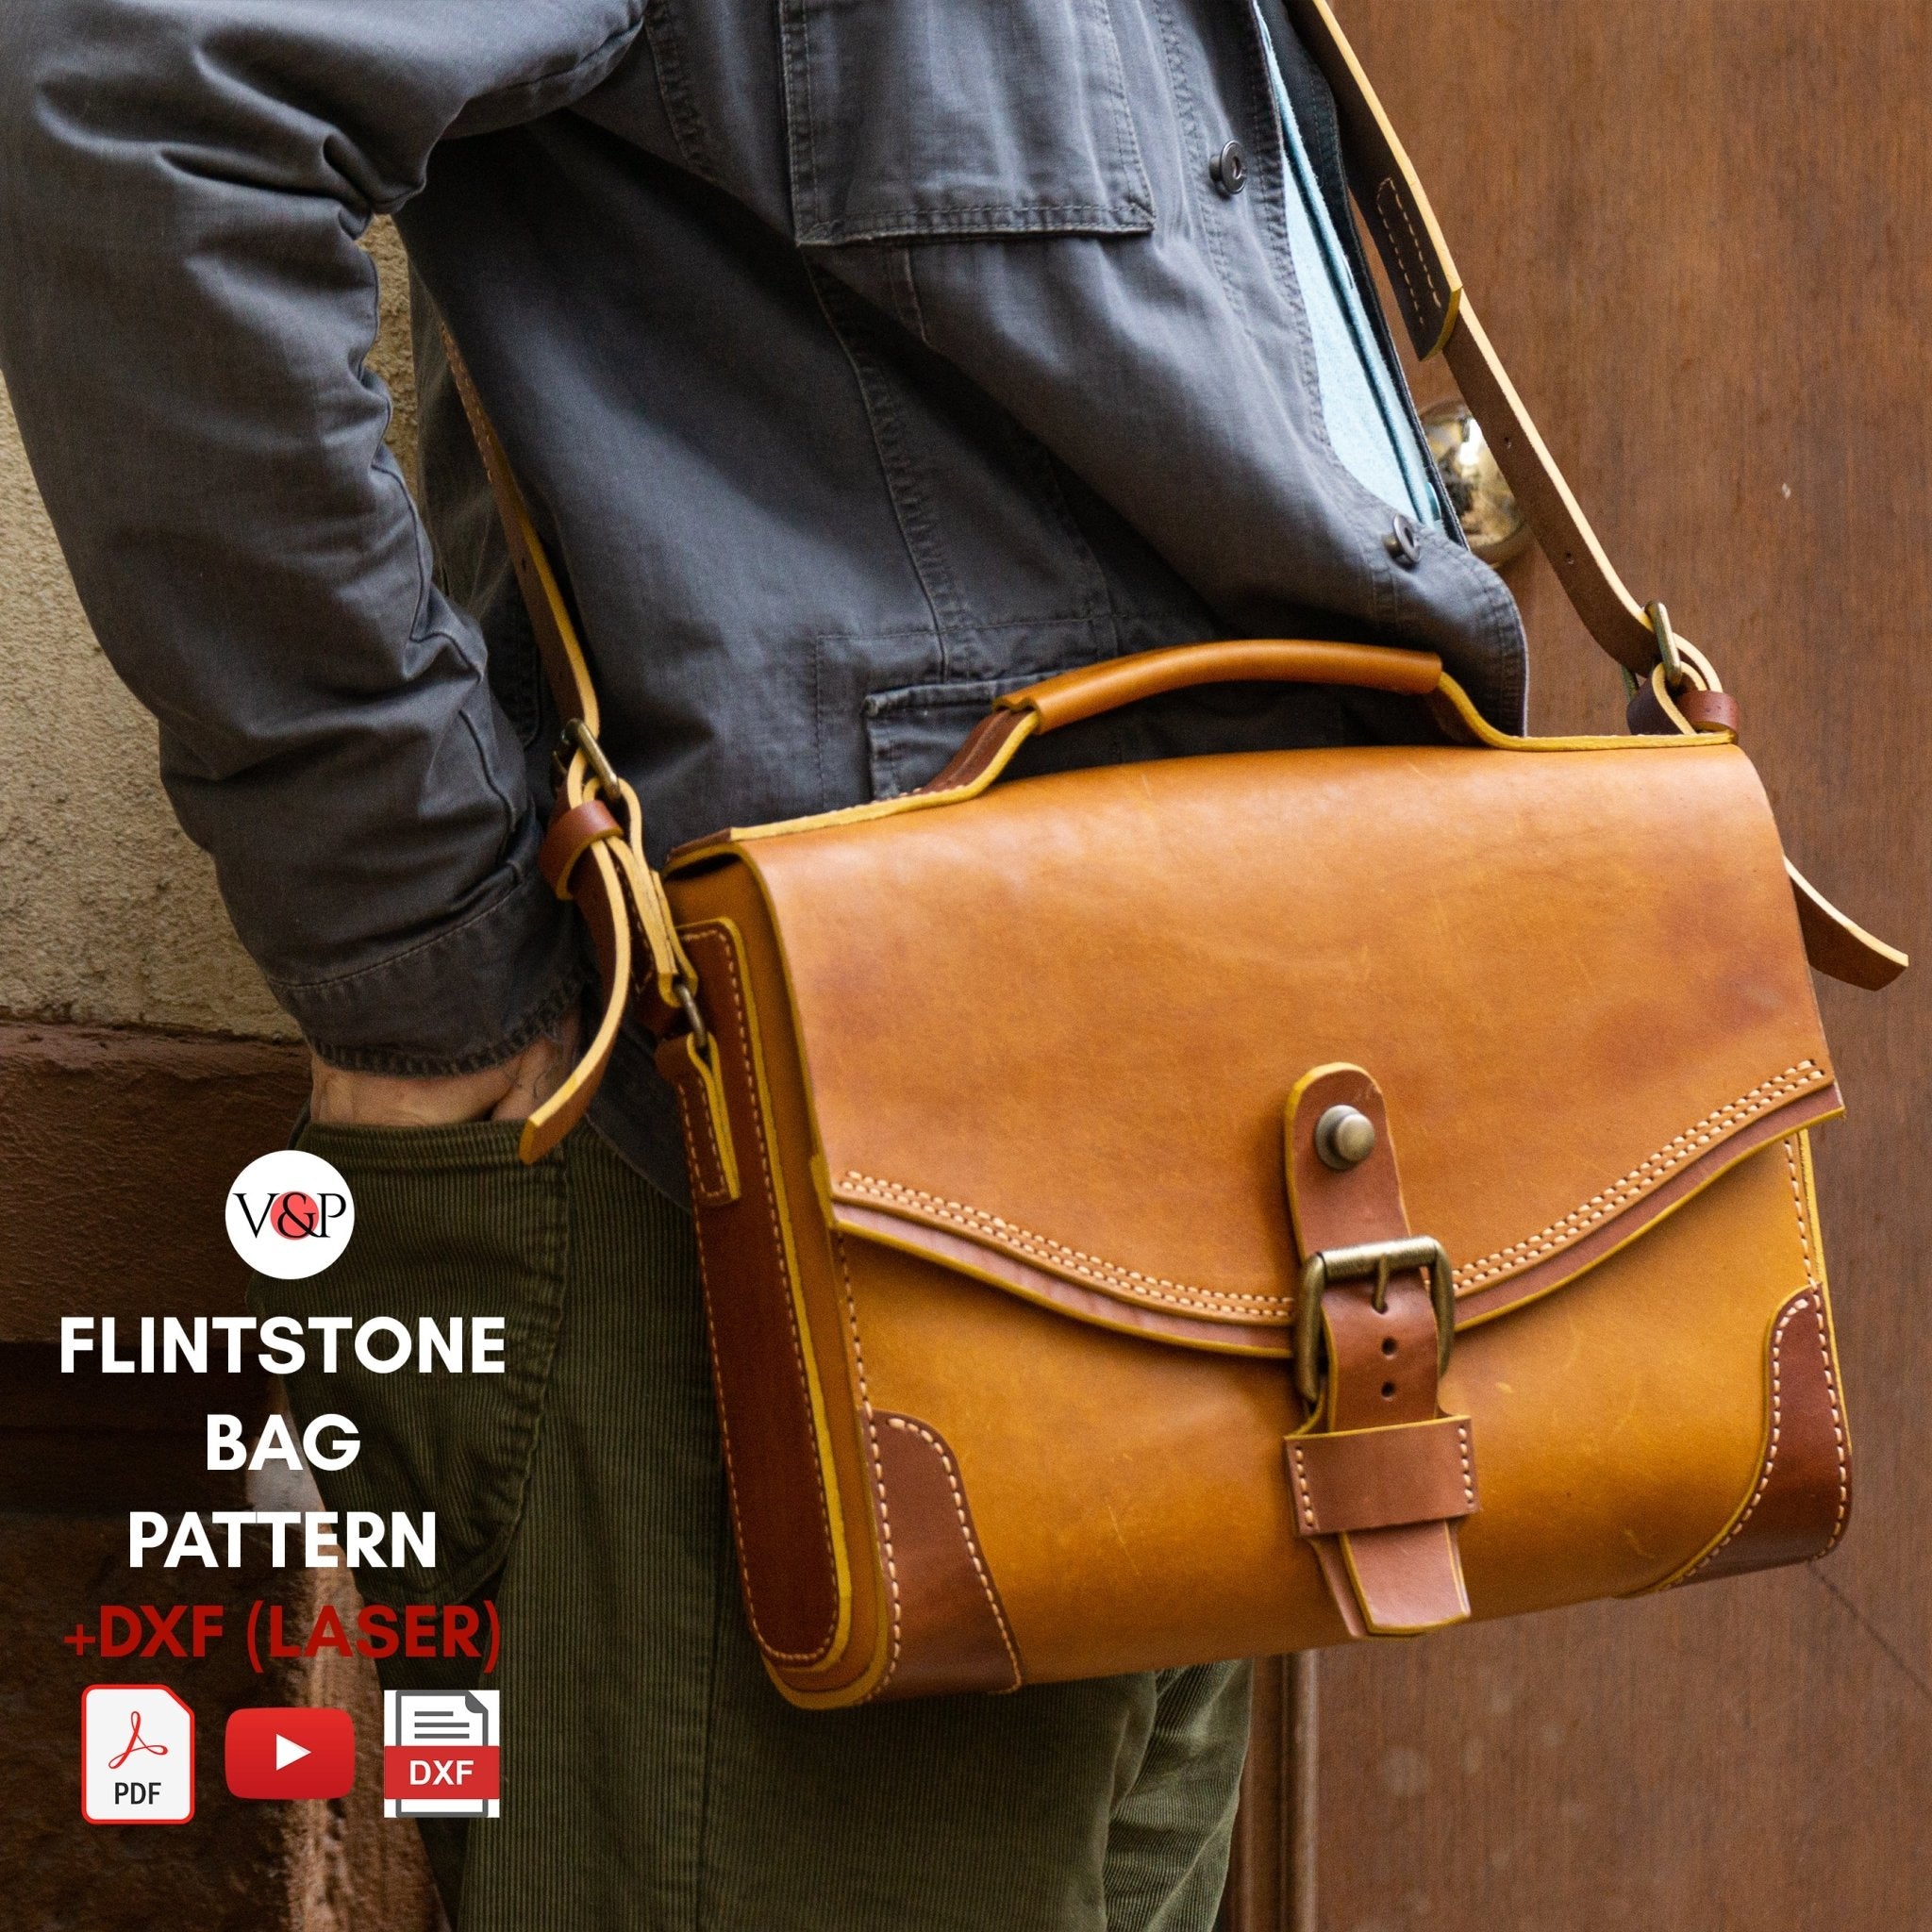 PDF Pattern, DXF File And Instructional Video for Flintstone Bag - Vasile and Pavel Leather Patterns